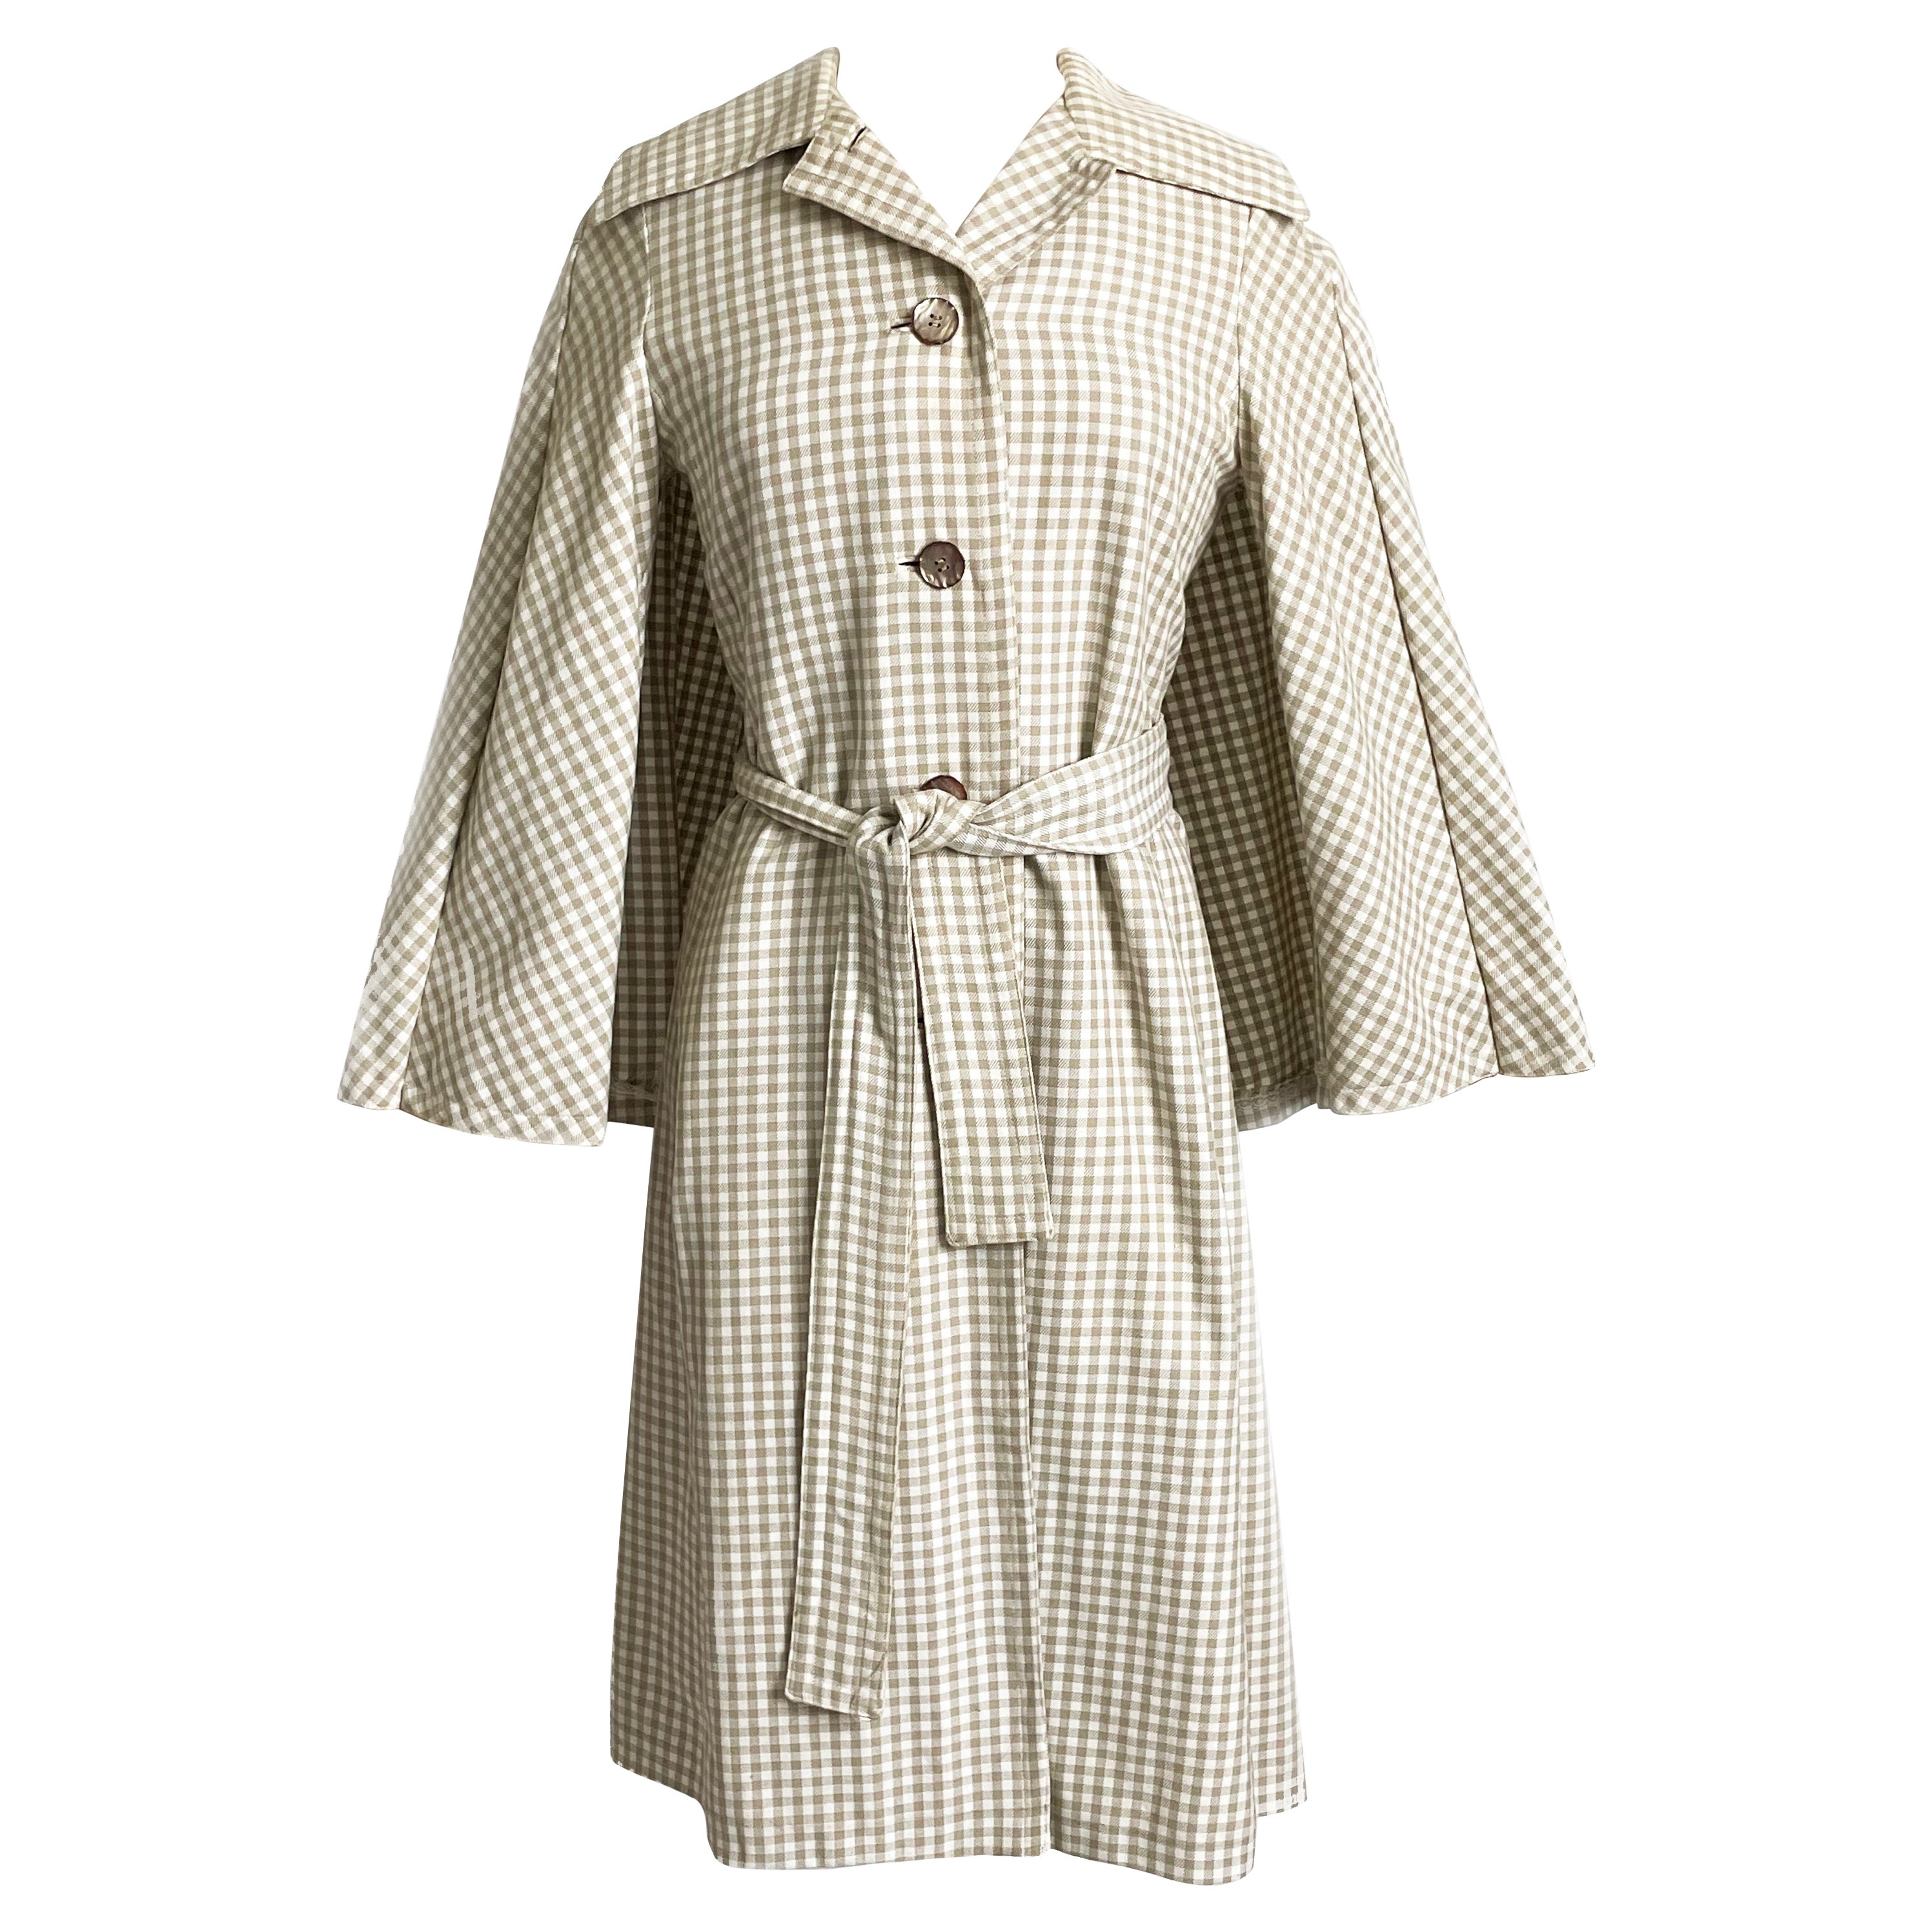 Donald Brooks Trench Coat Jacket with Caplet Check Pattern Vintage 70s 